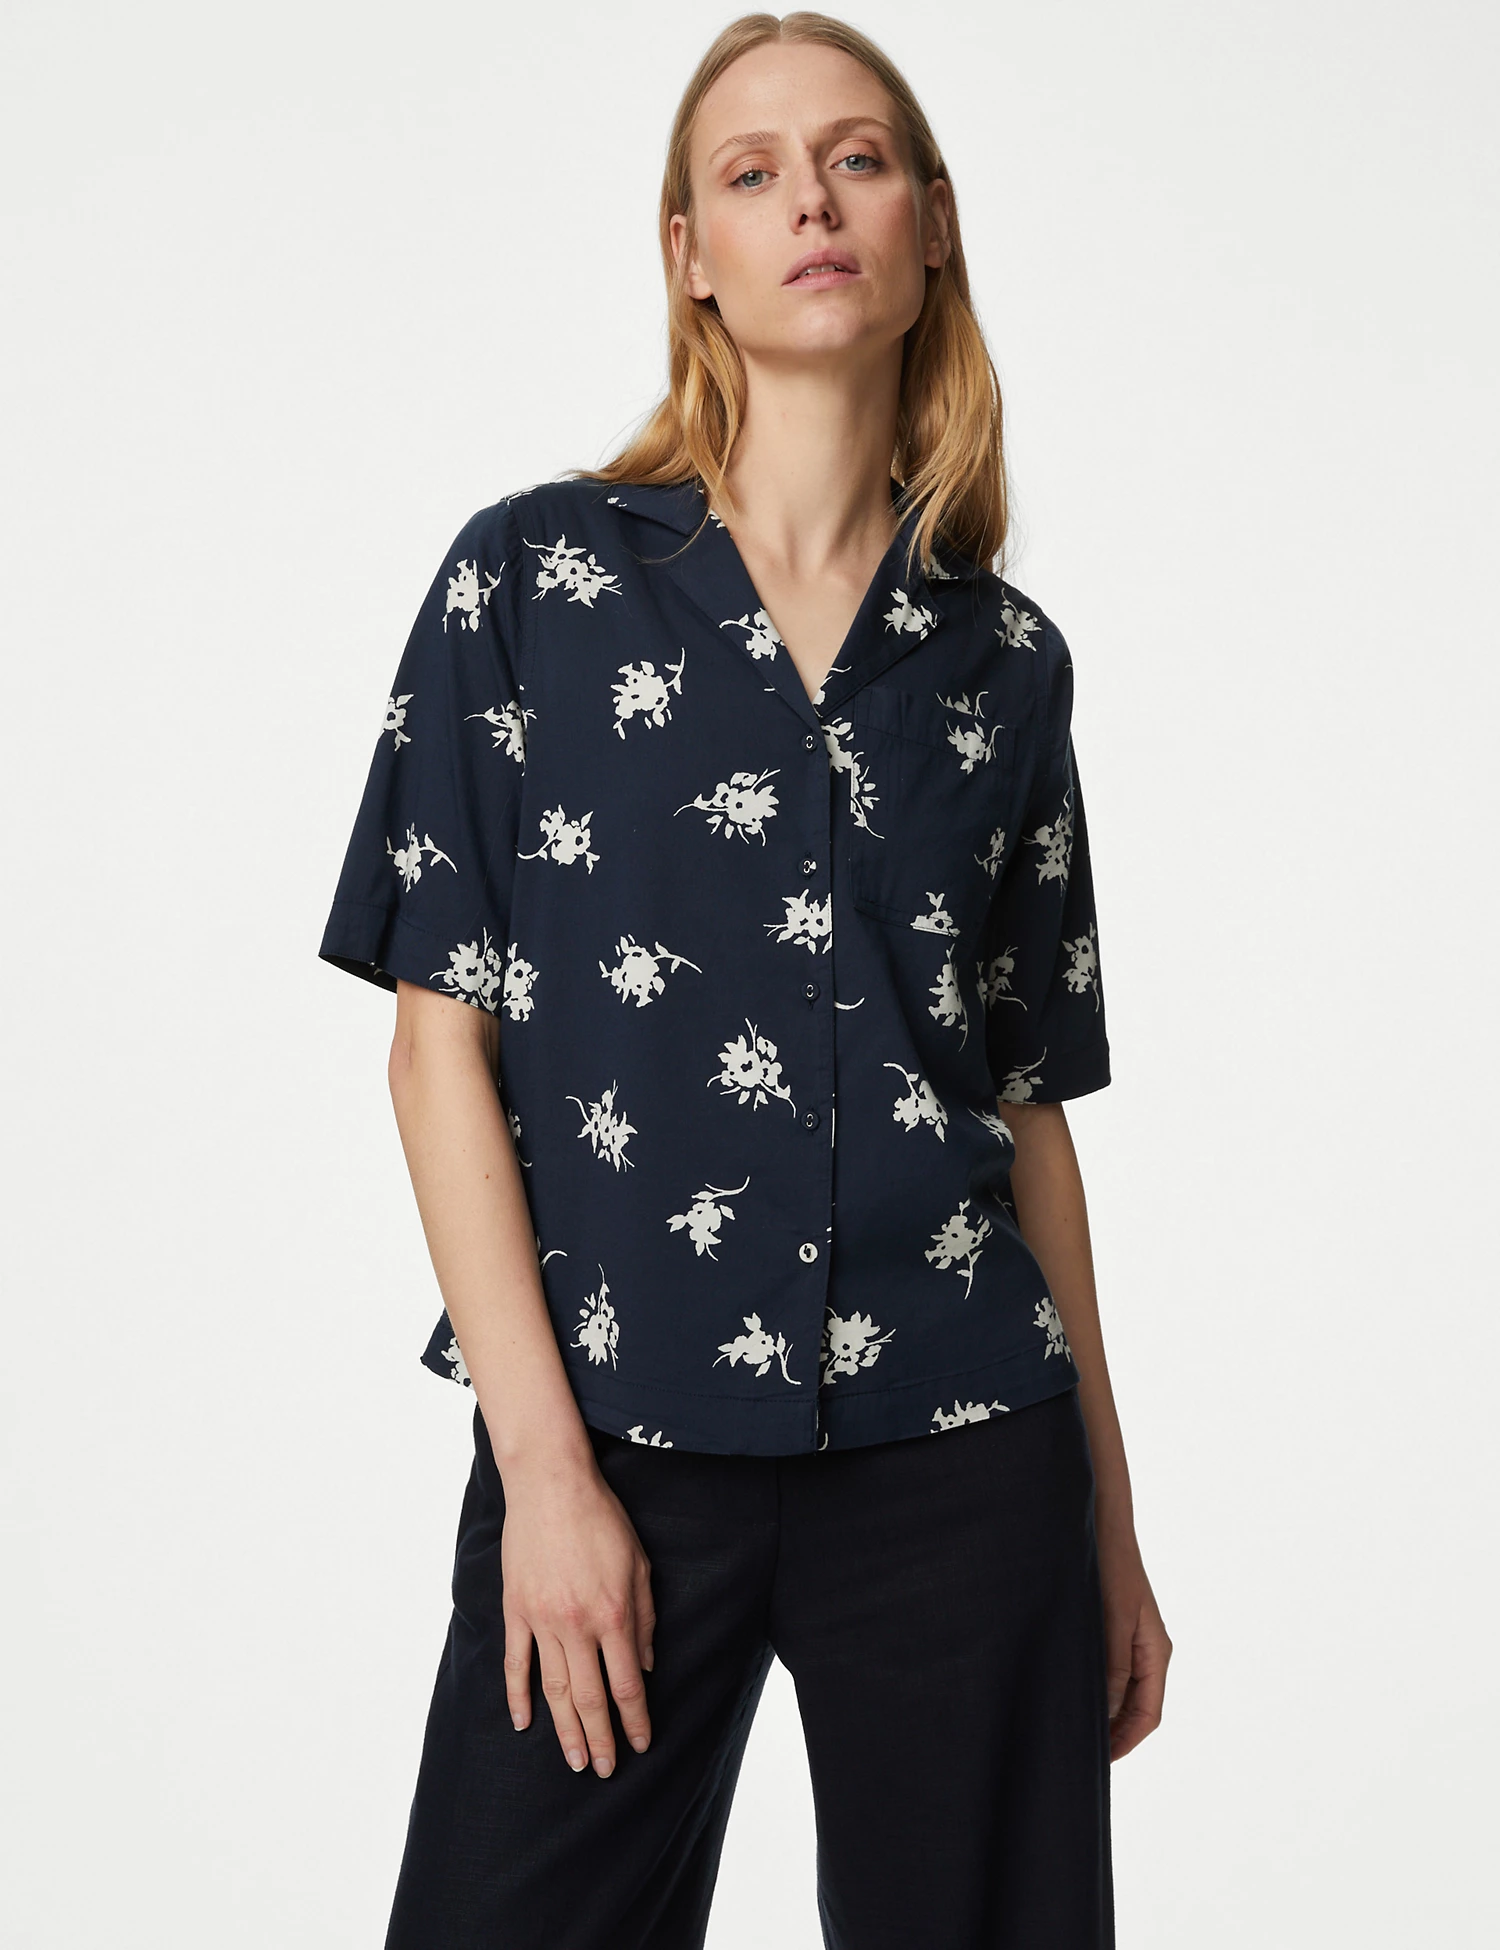 Cotton Rich Printed Collared Shirt from M&S